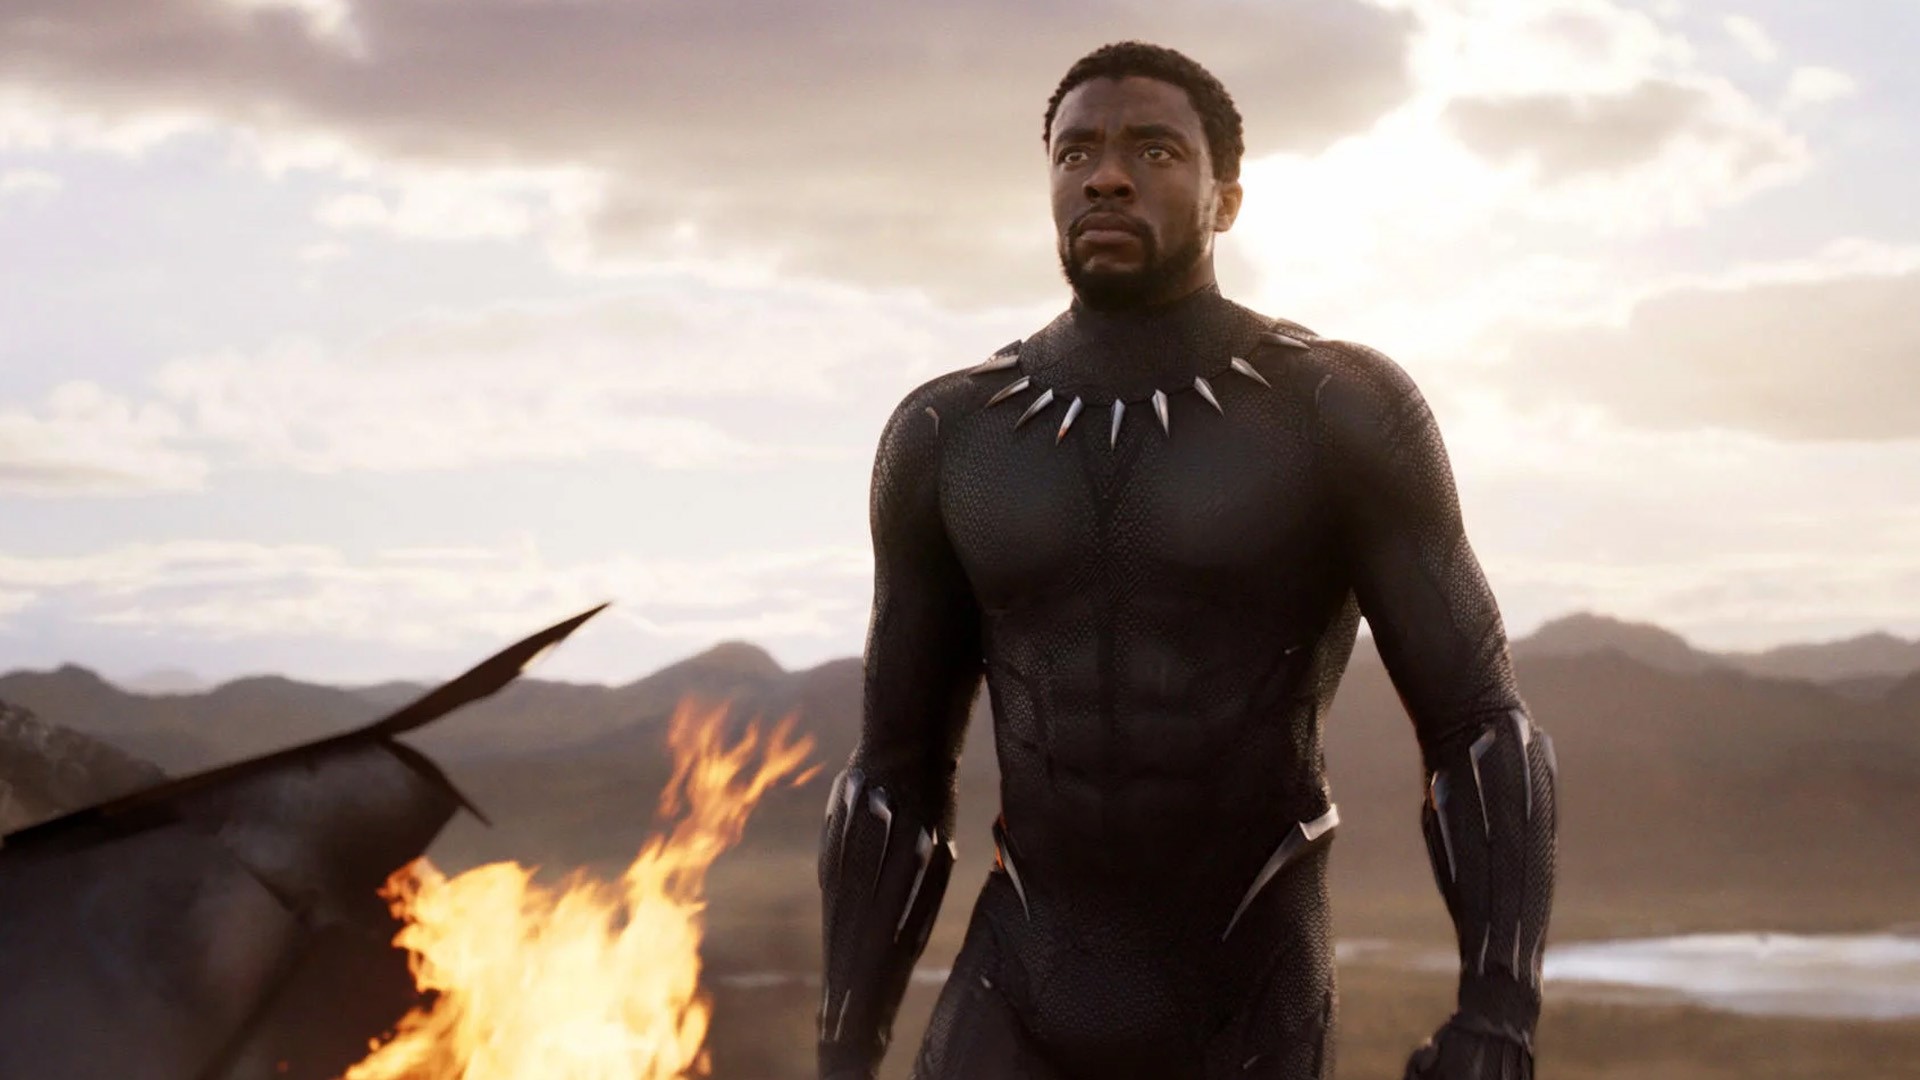 Boseman’s role as King T’challa in Black Panther became one of the most iconic images for young black people in America. You can see that with just how many tributes